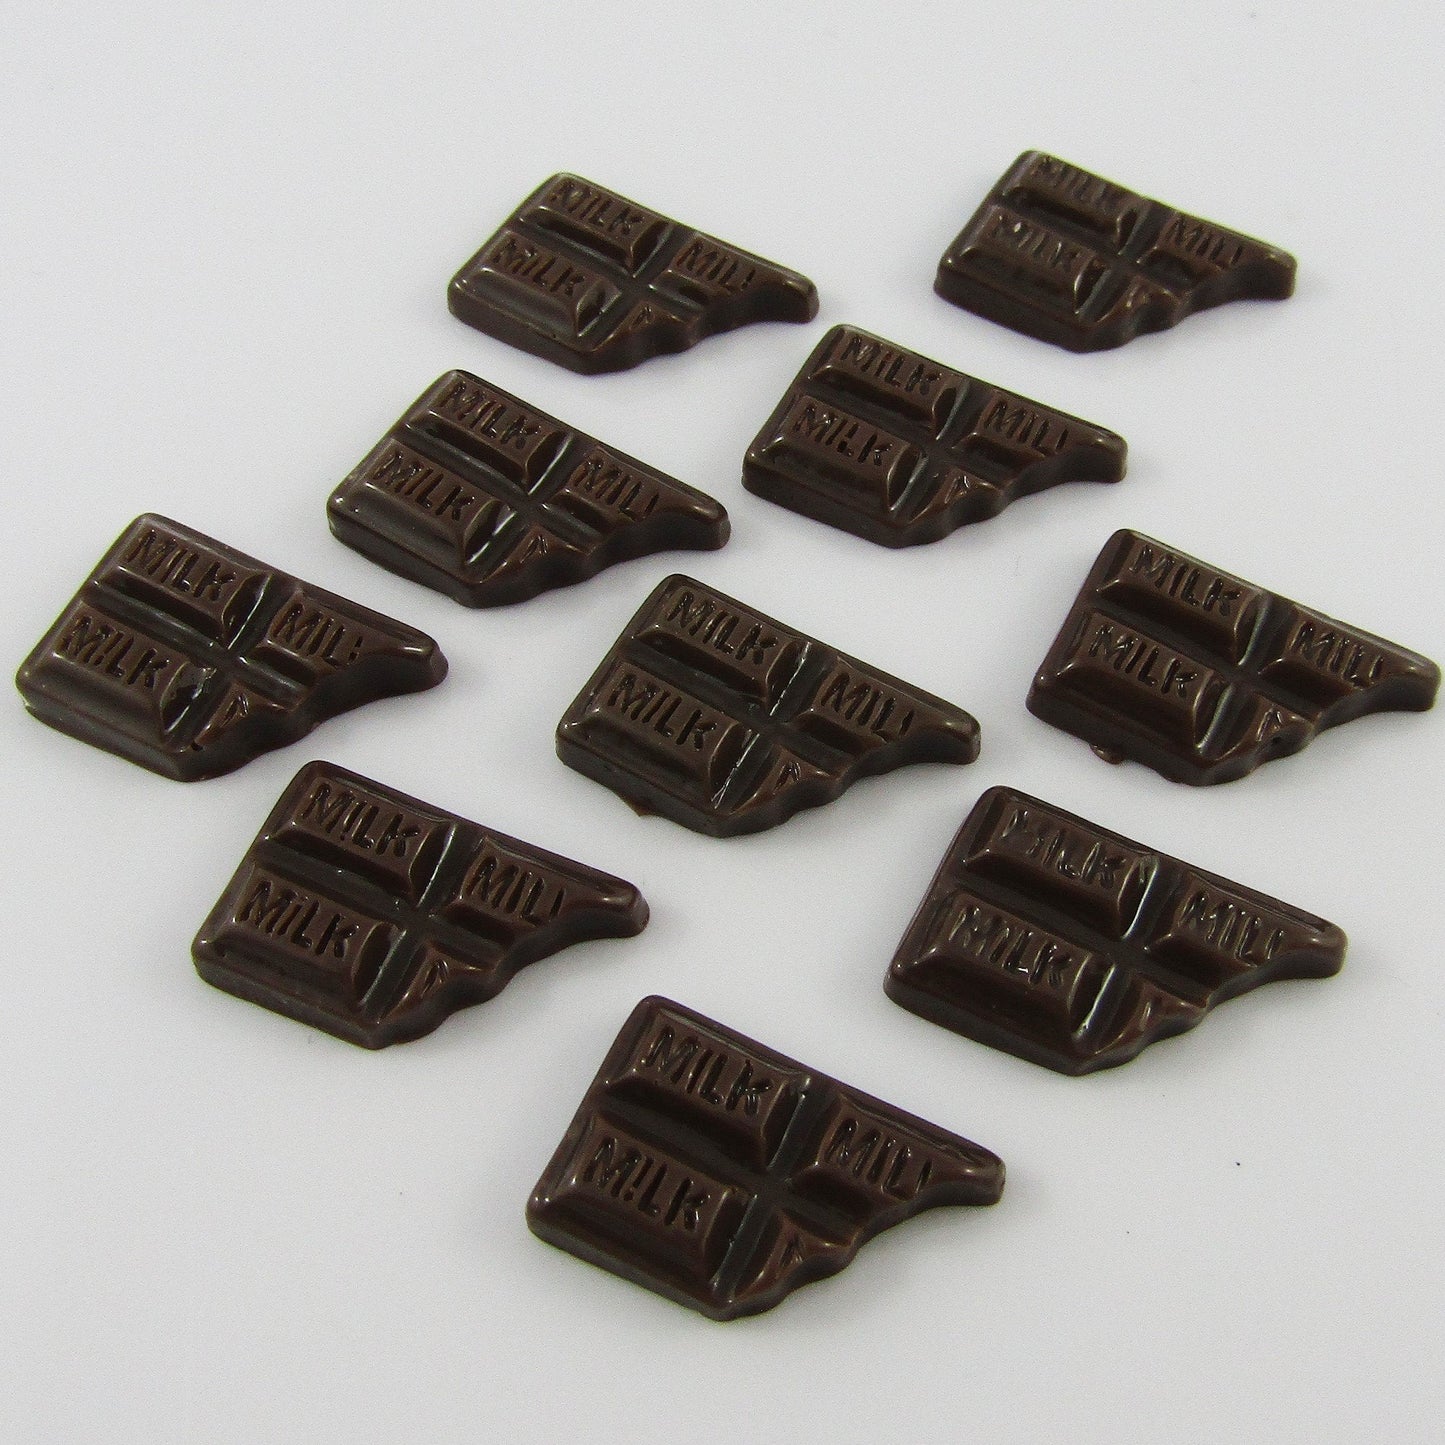 10pcs Resin Chocolate Block Cabochon 19x12mm For Scrapbooking Cards Hair Clips